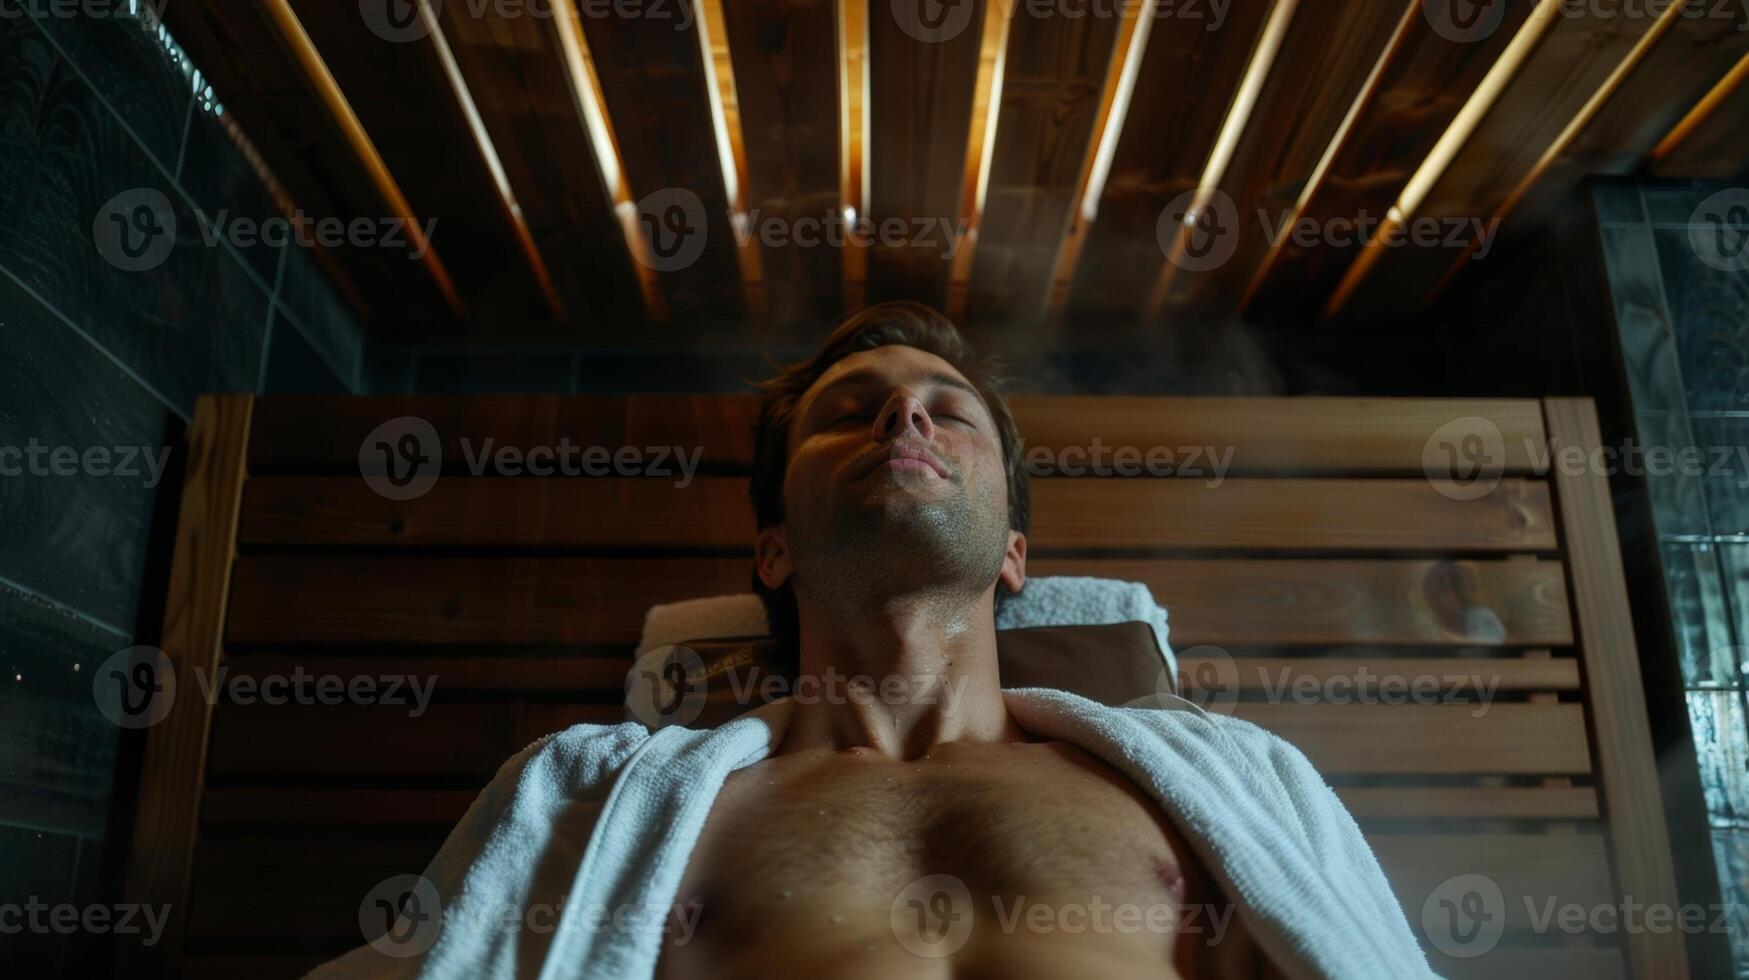 A towelclad man laying down in a sauna taking deep breaths as the heat helps him unwind after a long day. photo